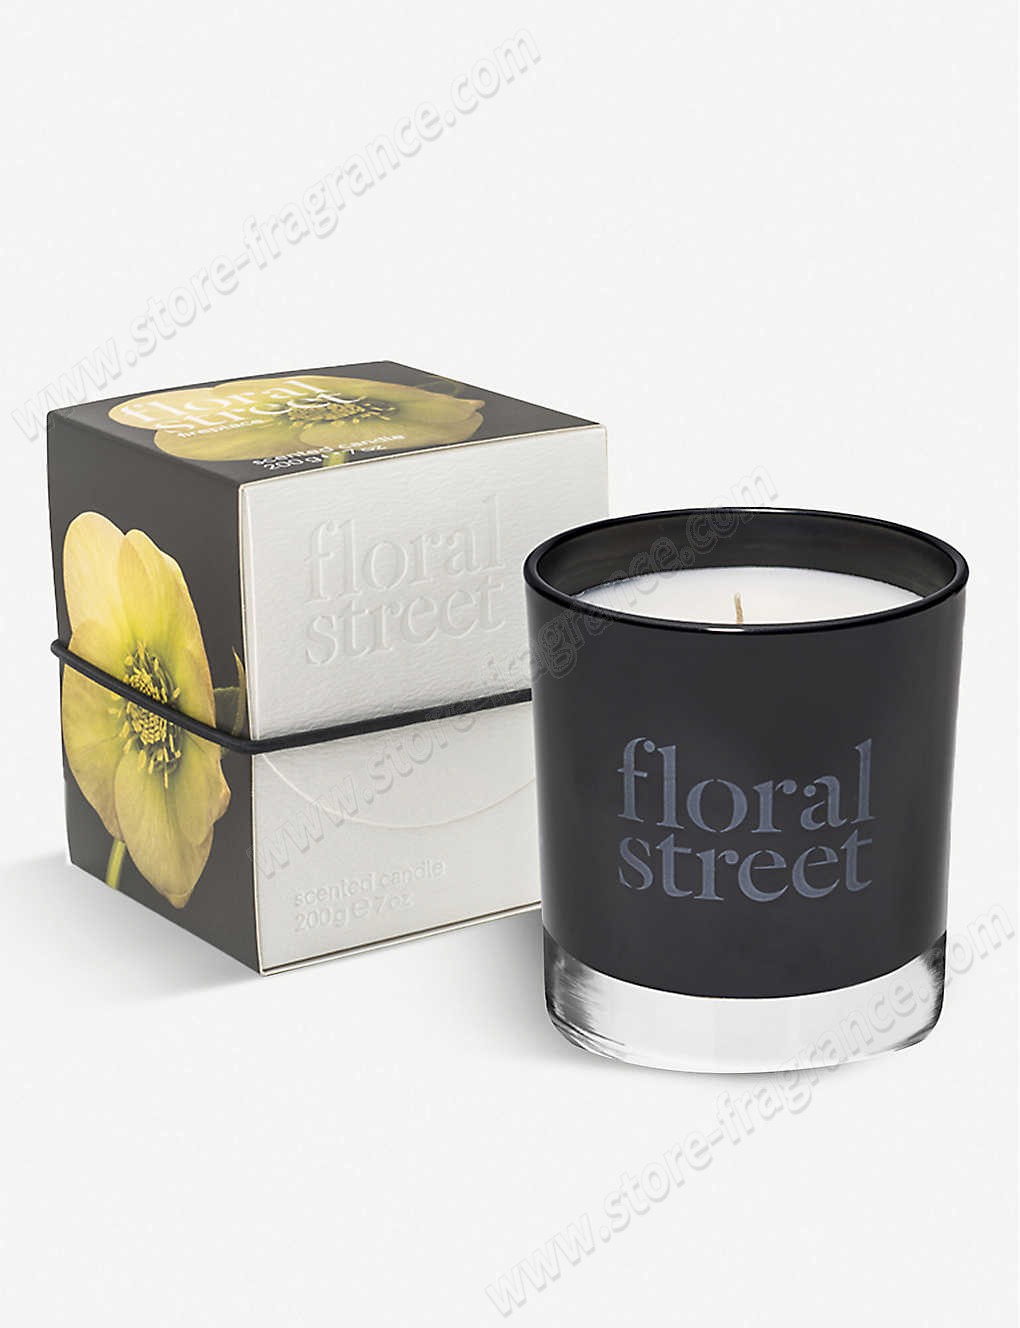 FLORAL STREET/Fireplace scented candle 200g ✿ Discount Store - -1